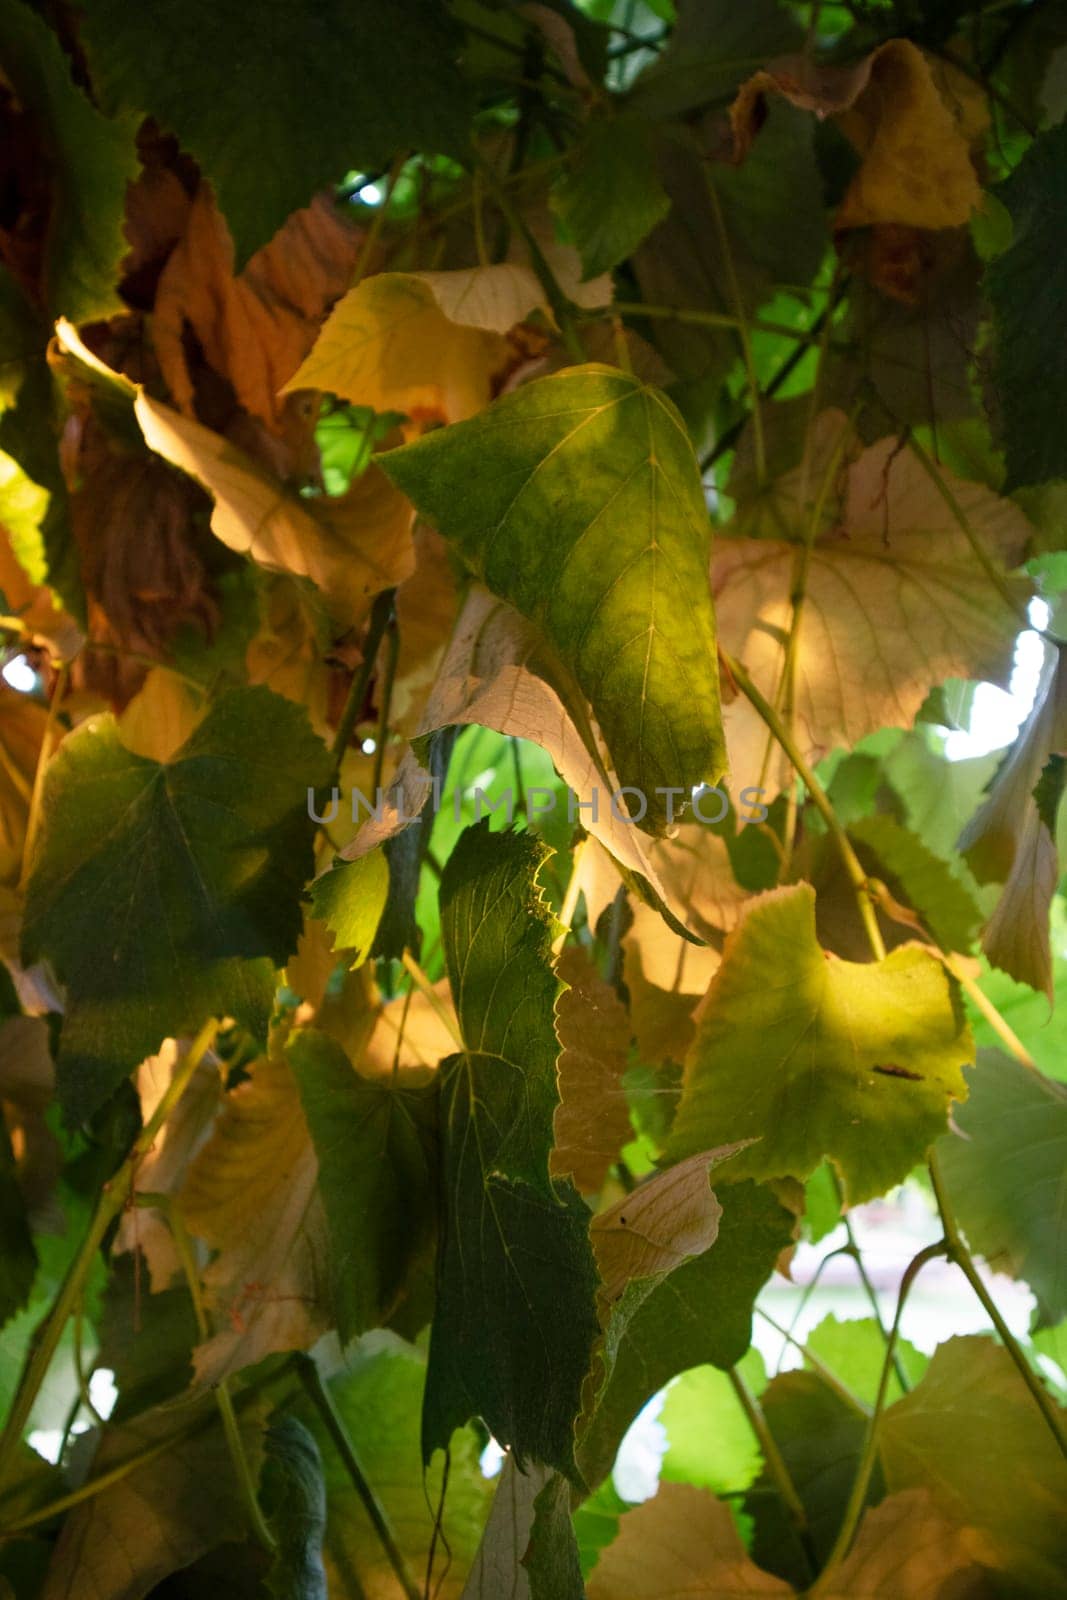 Photographic documentation of vine leaves in the autumn season 